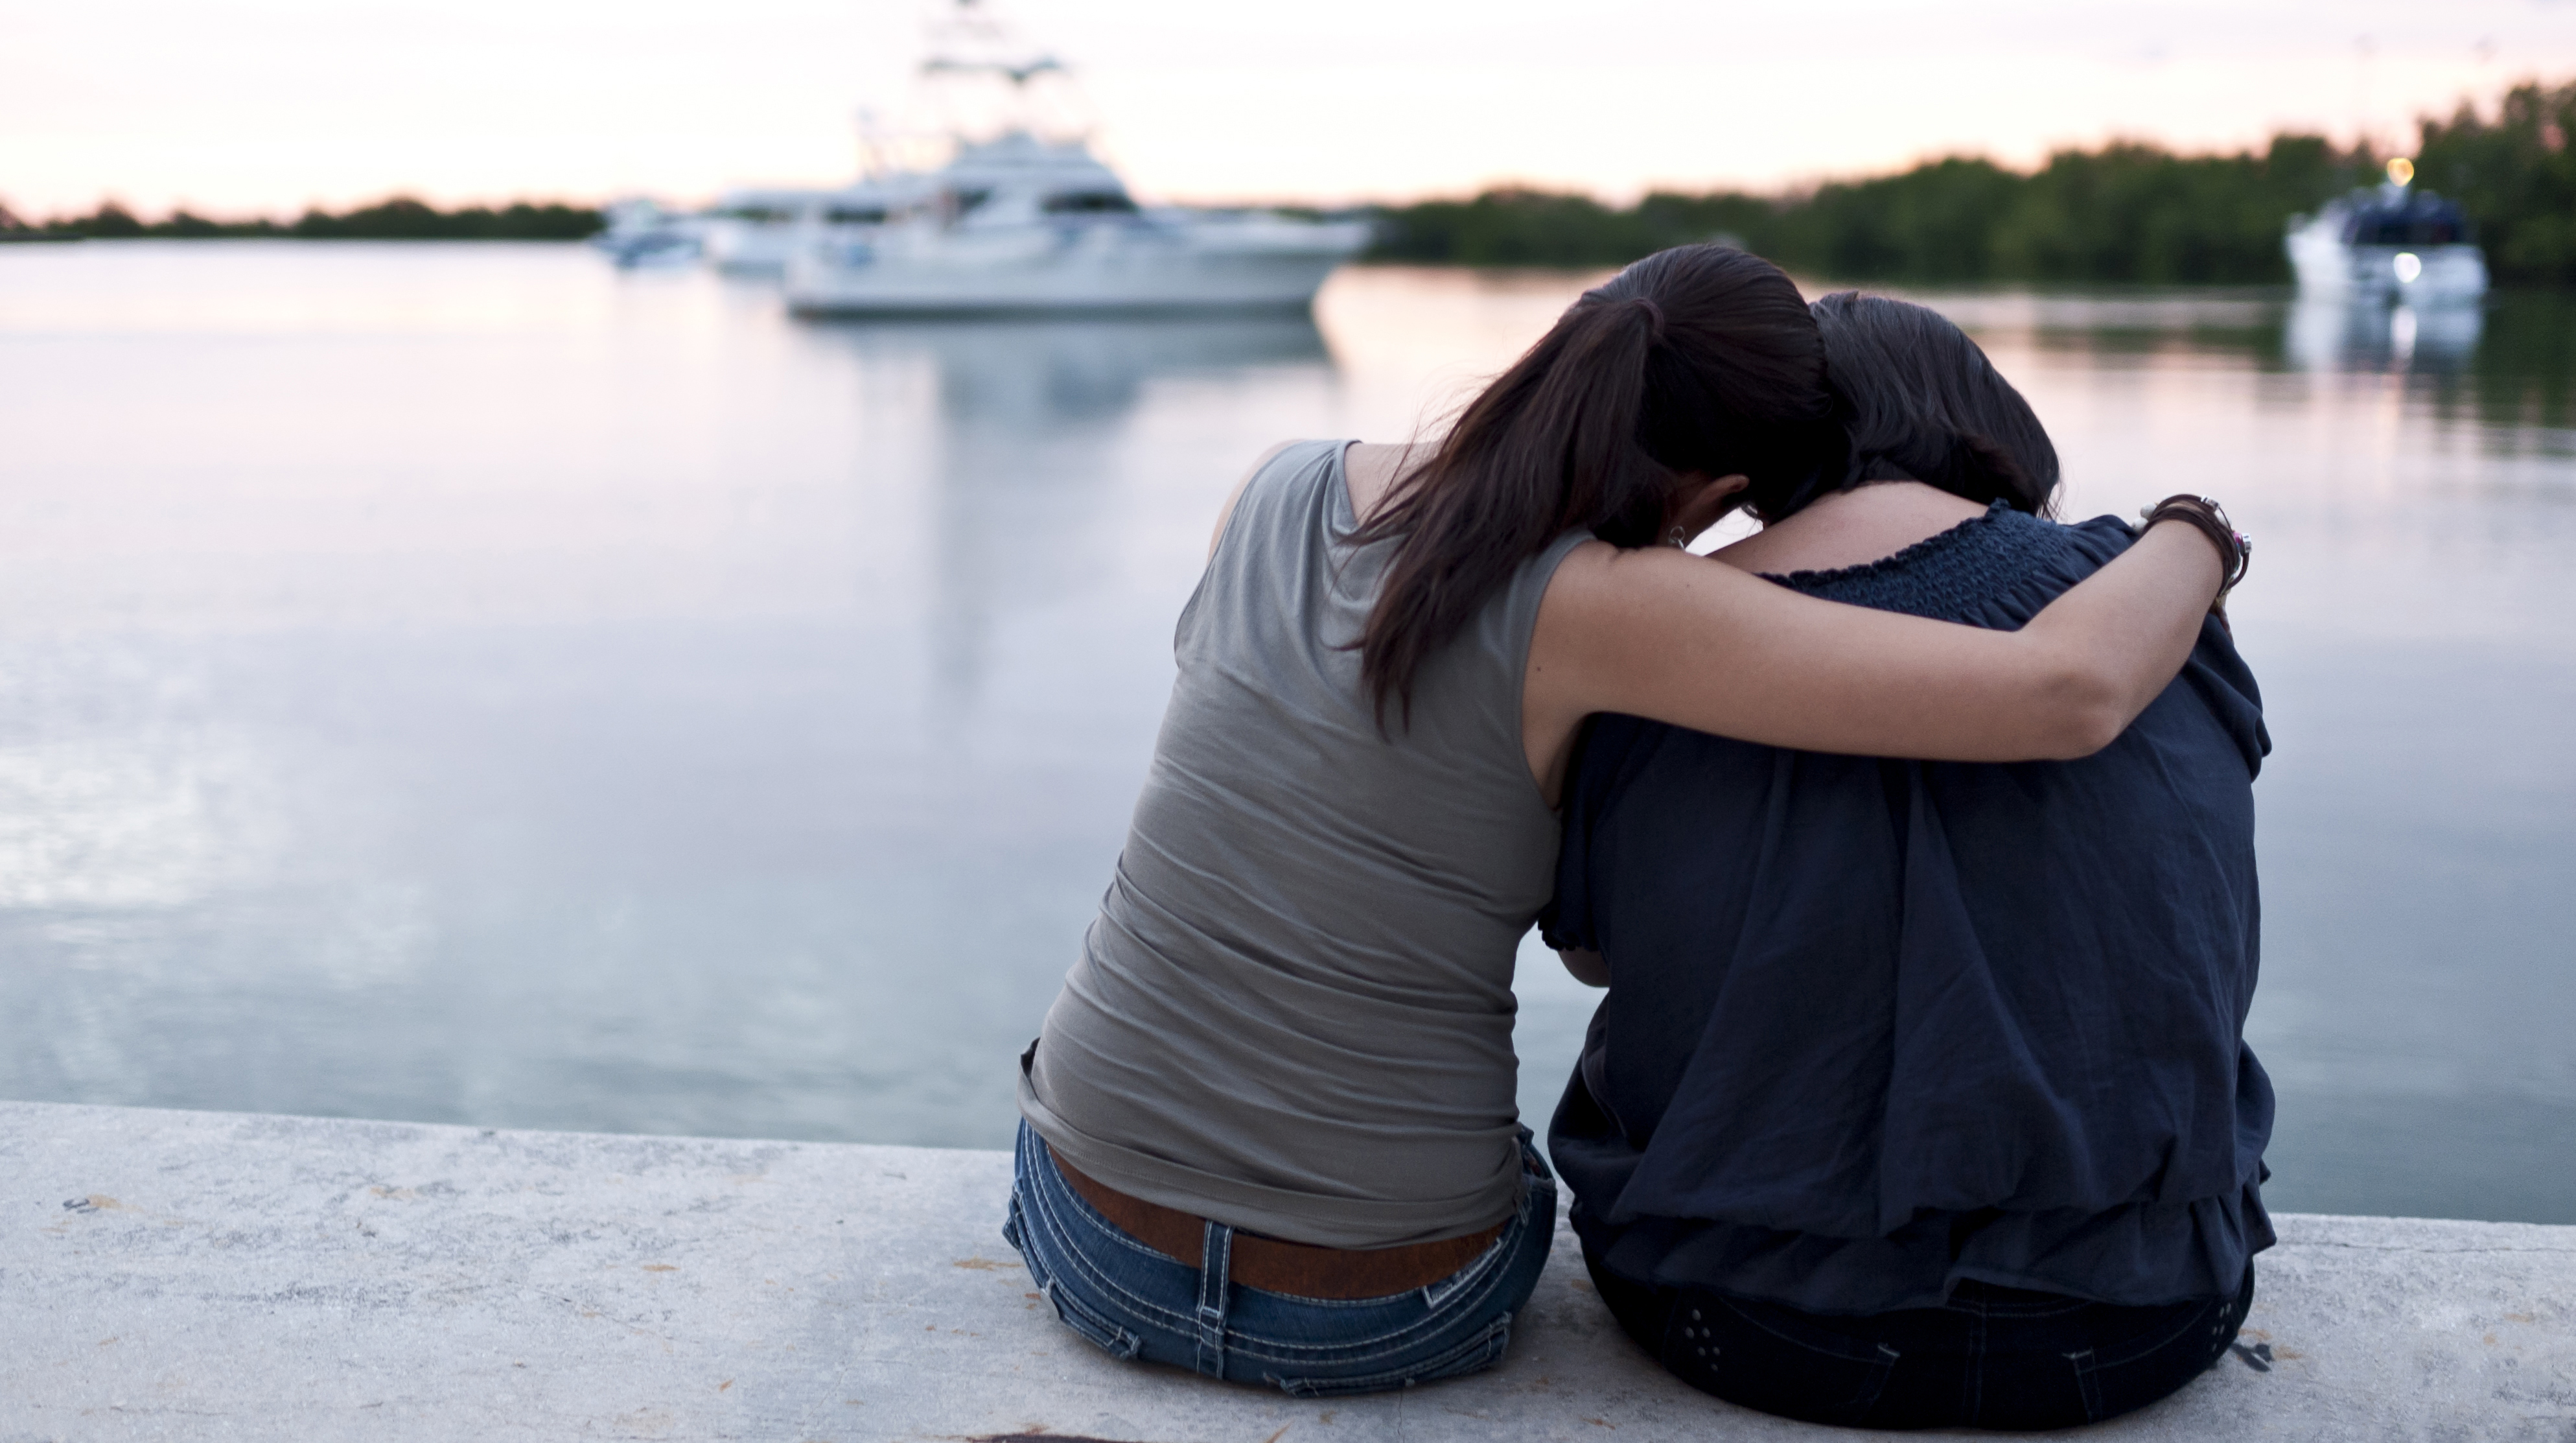 Picture, from behind, of two female students sitting by a lake; one is consoling the other with an arm around her shoulder.